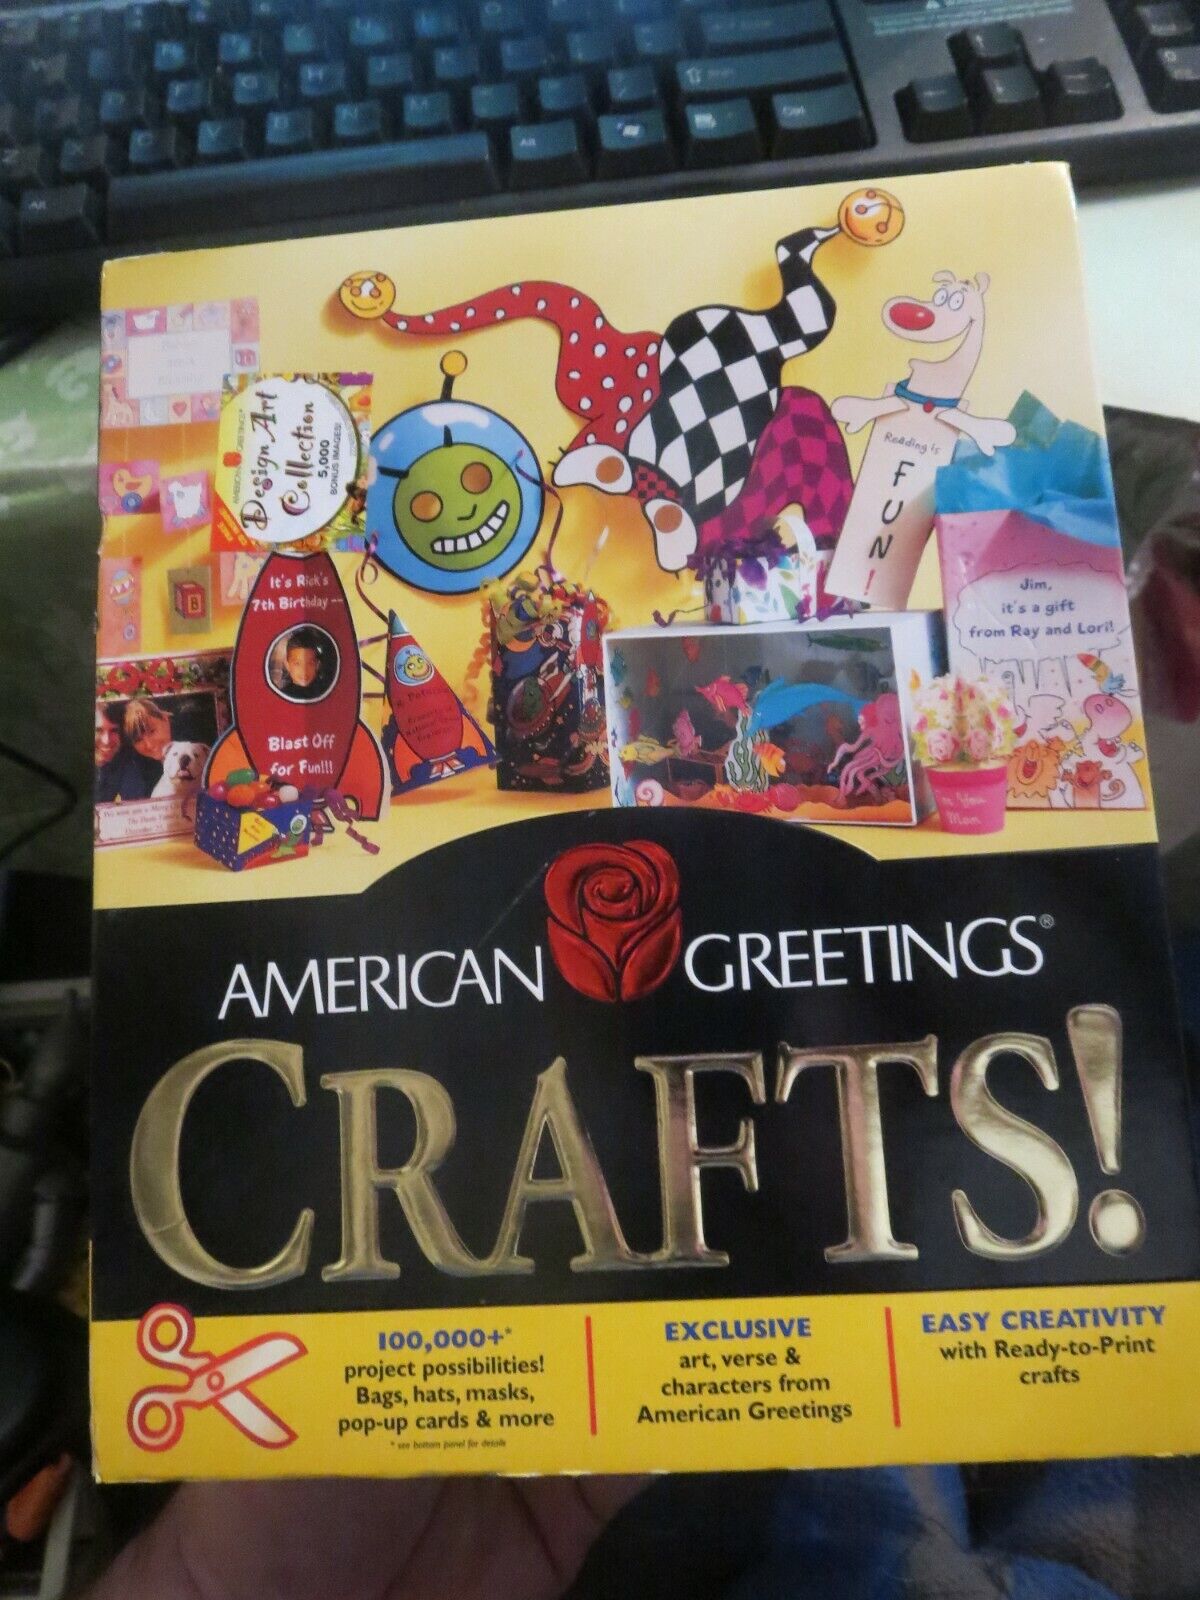 American Greetings CRAFTS for Windows 95/98 PC Box set factory sealed